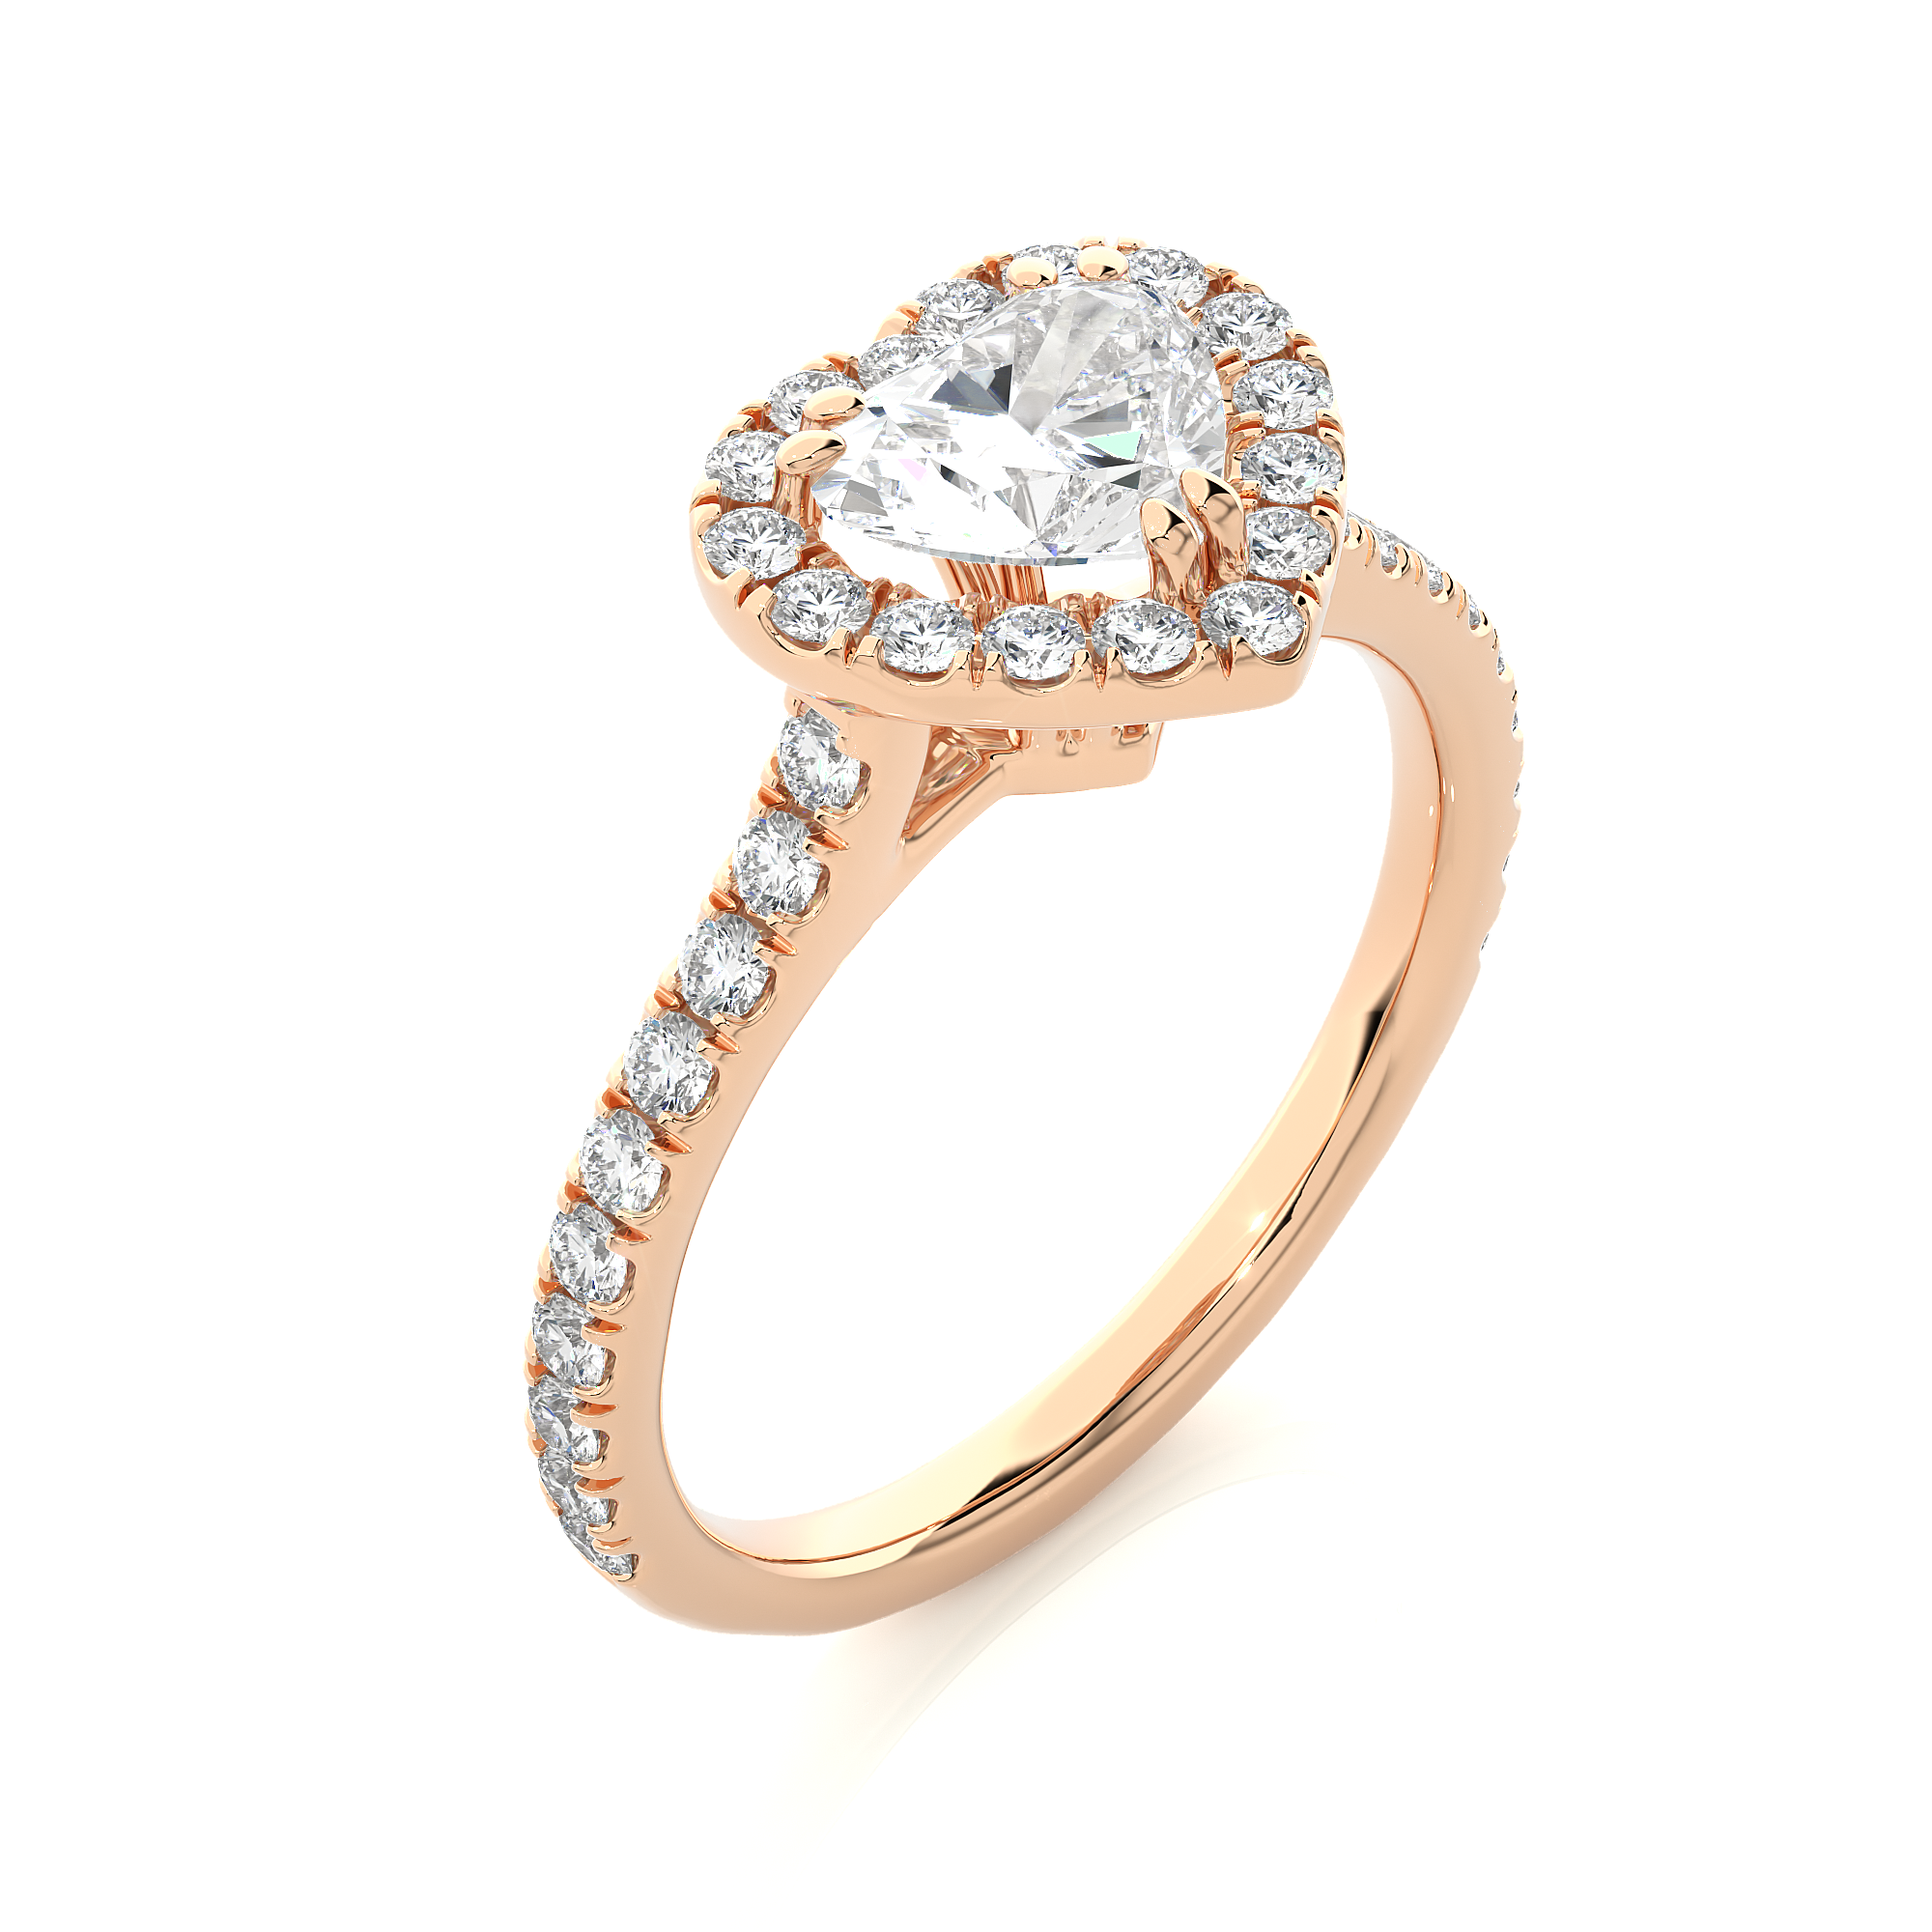 1.33Ct Heart Shaped Solitaire Diamond Ring in 14Kt Rose Gold- Blu Diamonds